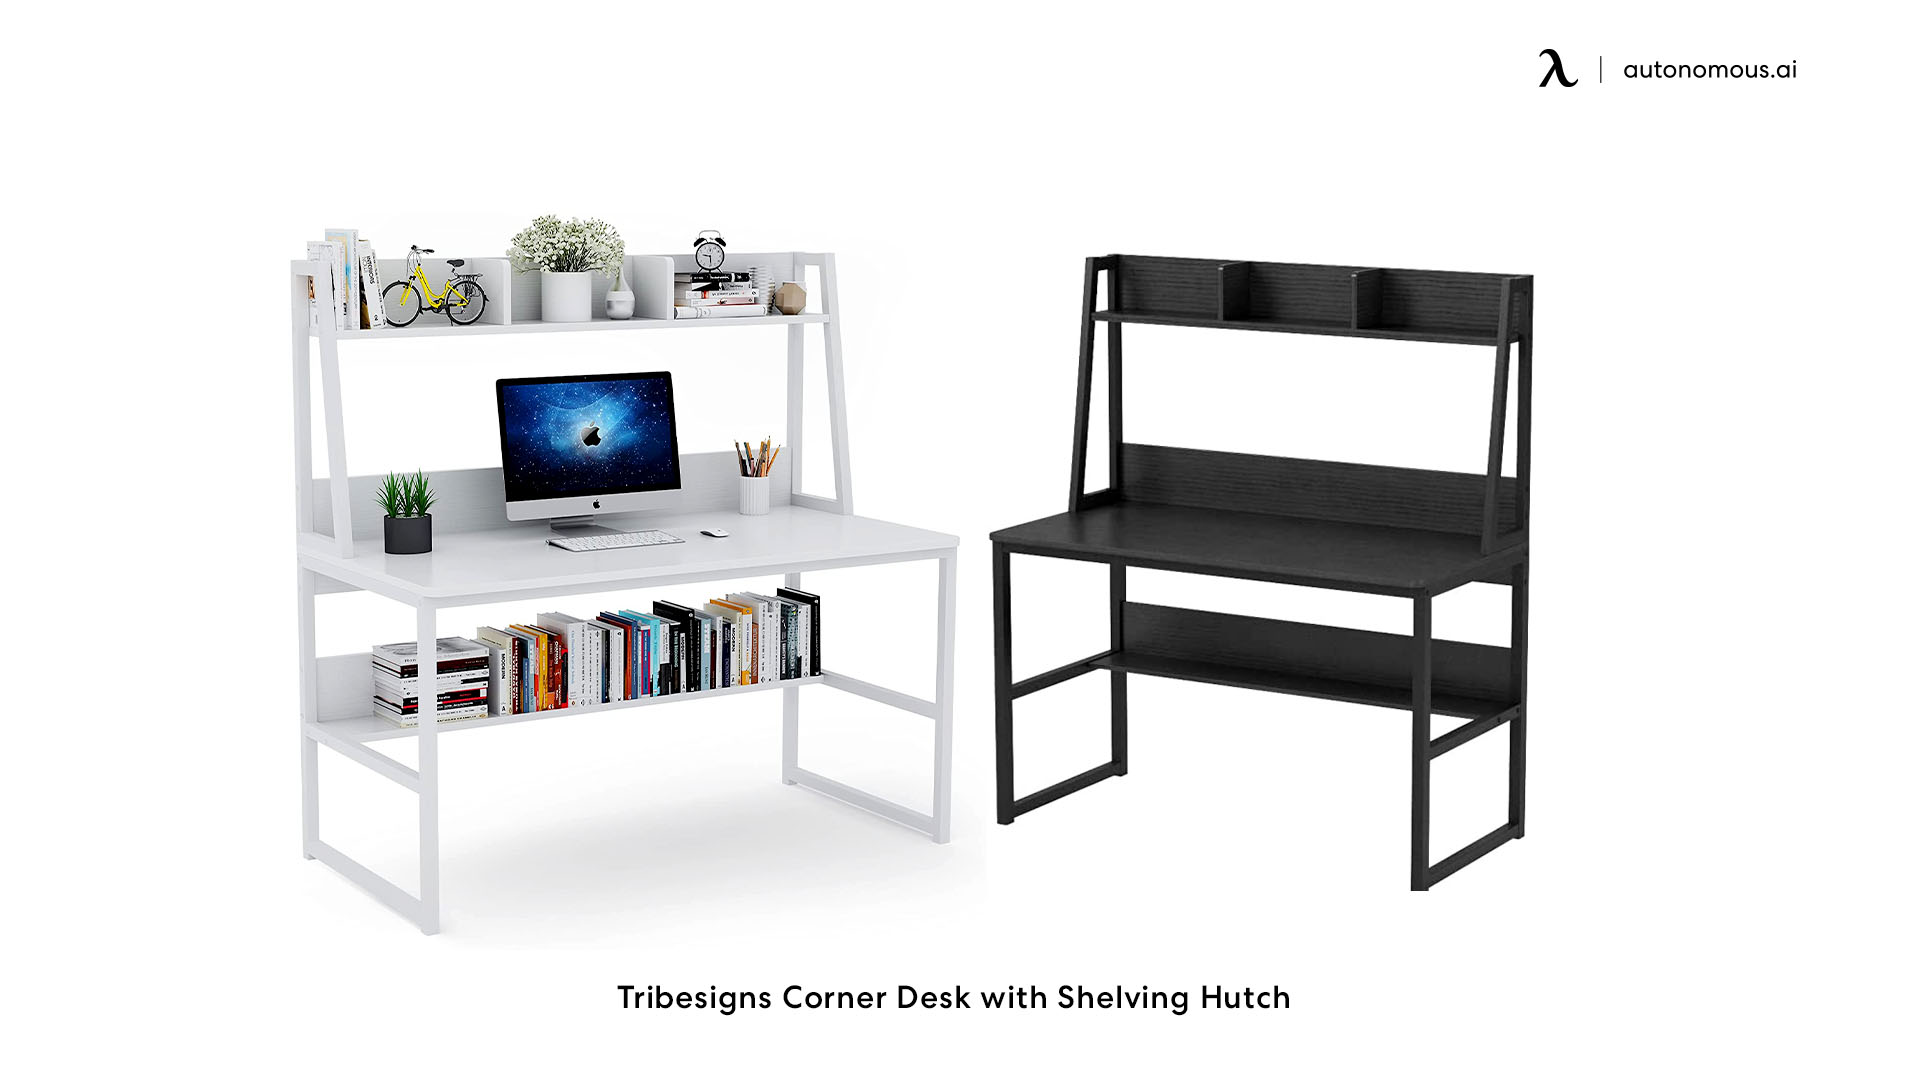 47-inch Hutch Style Desk with Shelves from Tribesigns